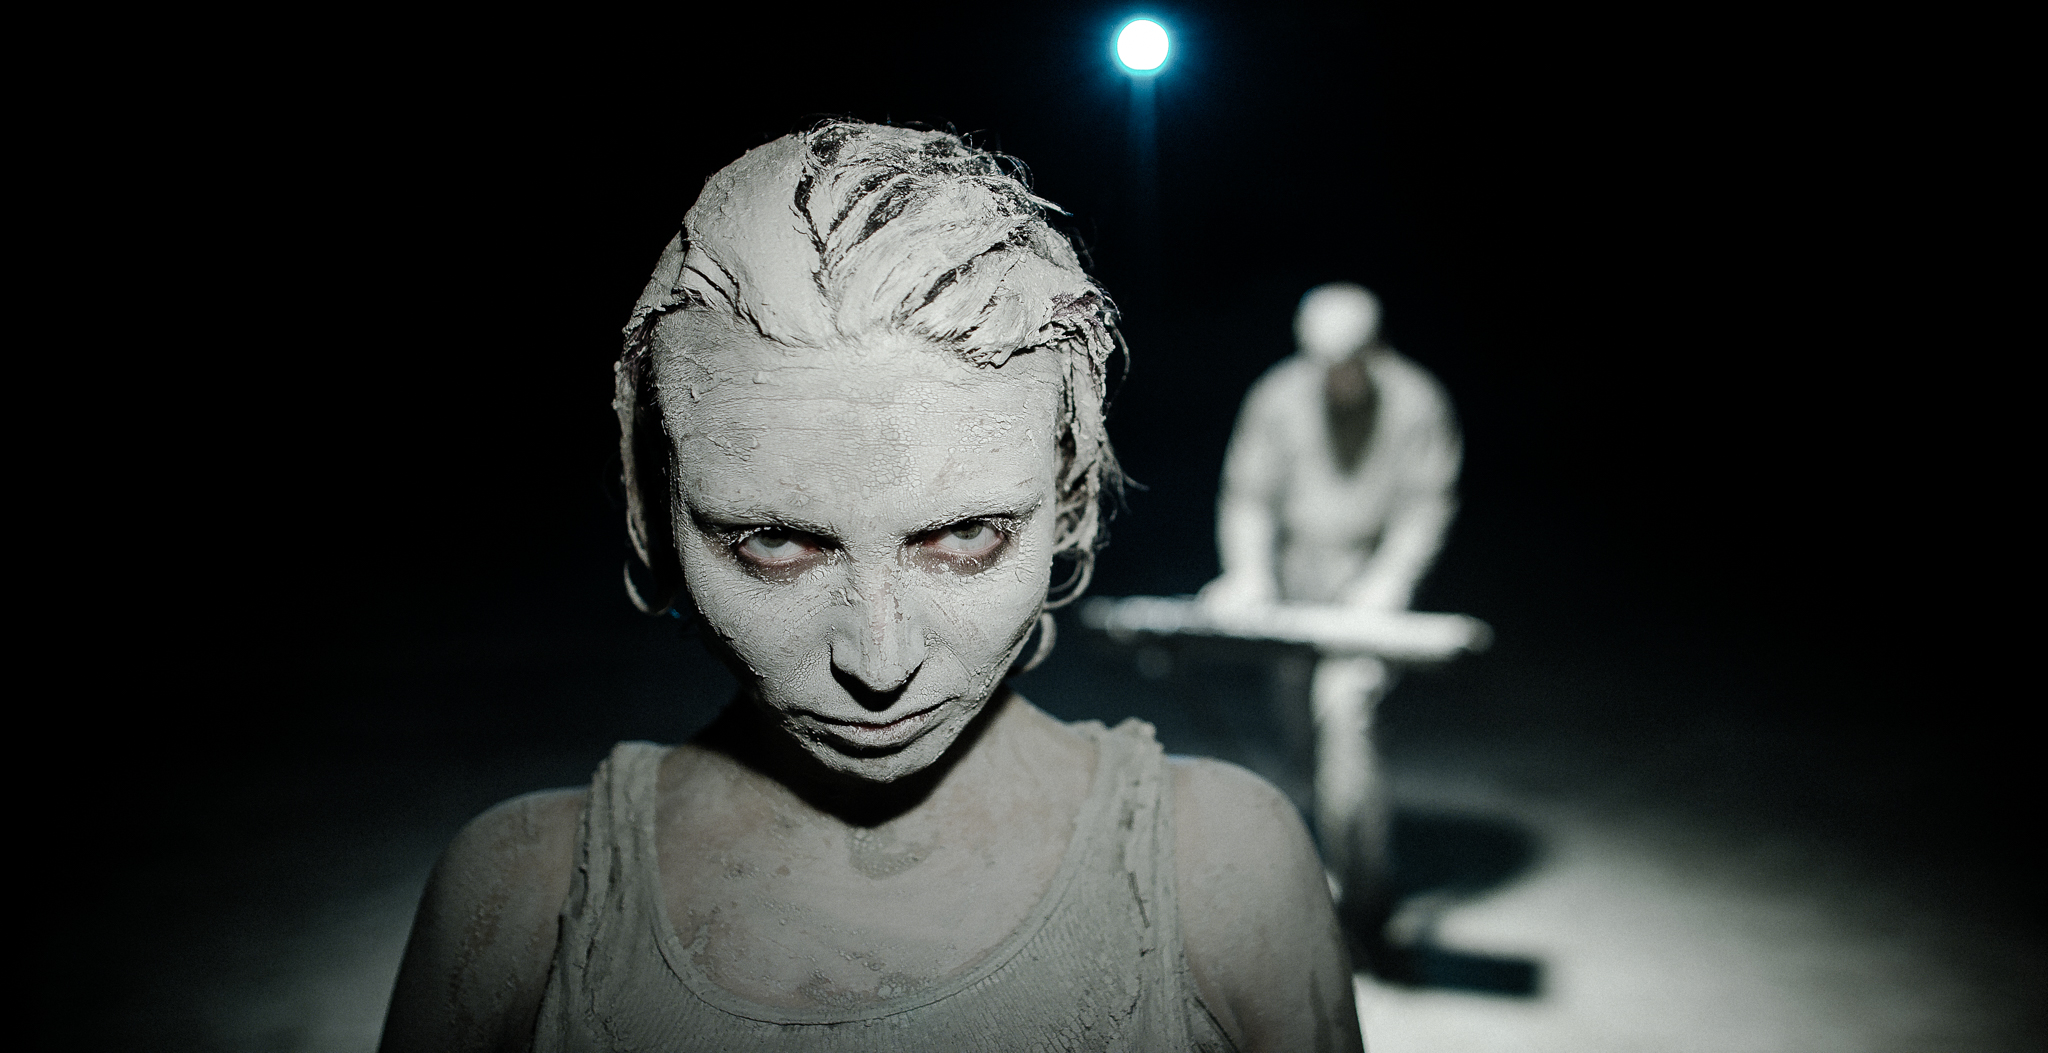 Nadia Garofalo, from Melter band, from Golem music video. Covered in mud with Robert Hyman on keyboards.